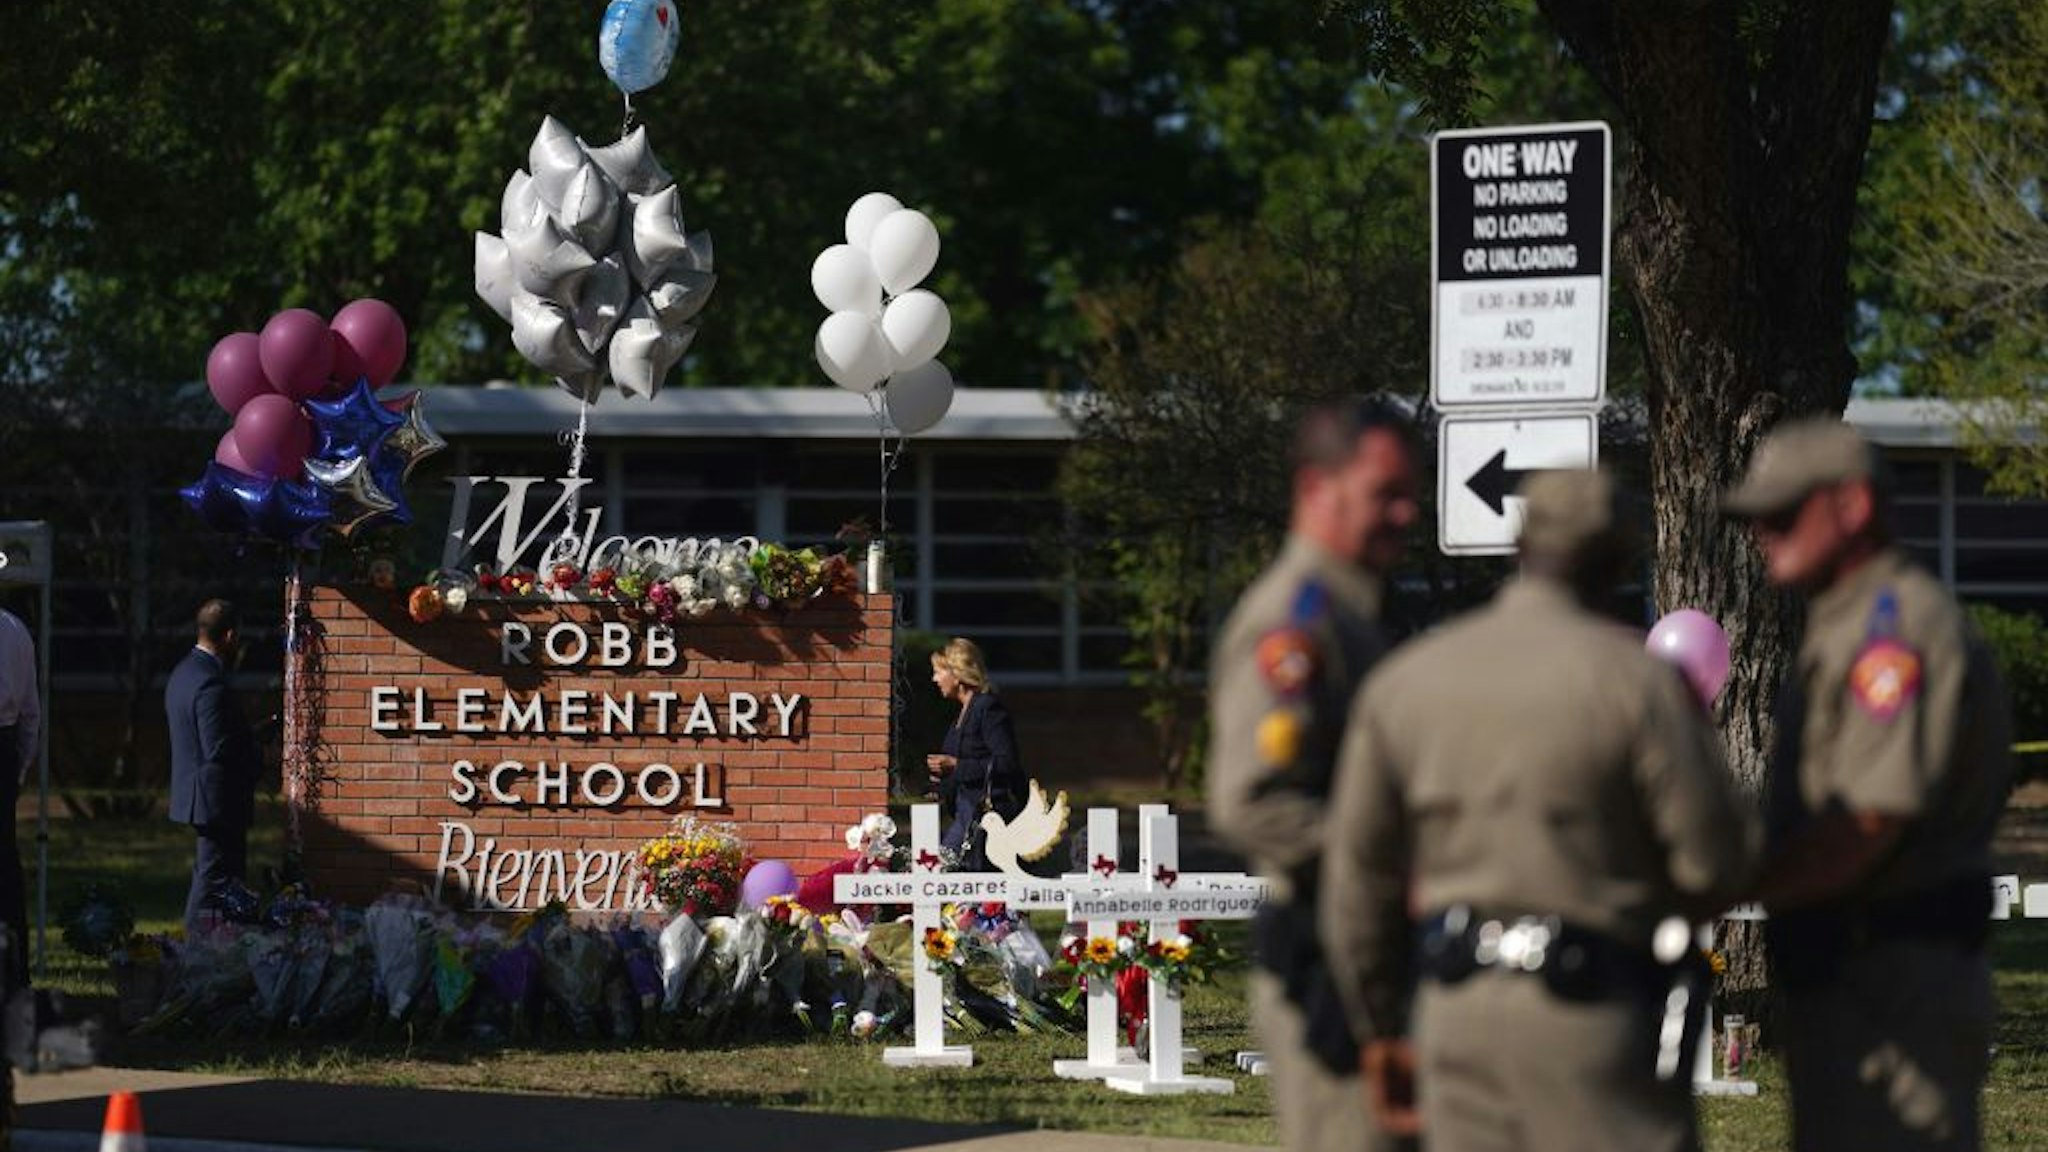 Police officers stand next to a makeshift memorial outside the Robb Elementary School on May 26, 2022 in Uvalde, Texas. - Grief at the massacre of 19 children at the elementary school in Texas spilled into confrontation on May 25, as angry questions mounted over gun control -- and whether this latest tragedy could have been prevented. The tight-knit Latino community of Uvalde on May 24 became the site of the worst school shooting in a decade, committed by a disturbed 18-year-old armed with a legally bought assault rifle. (Photo by allison dinner / AFP) (Photo by ALLISON DINNER/AFP via Getty Images)